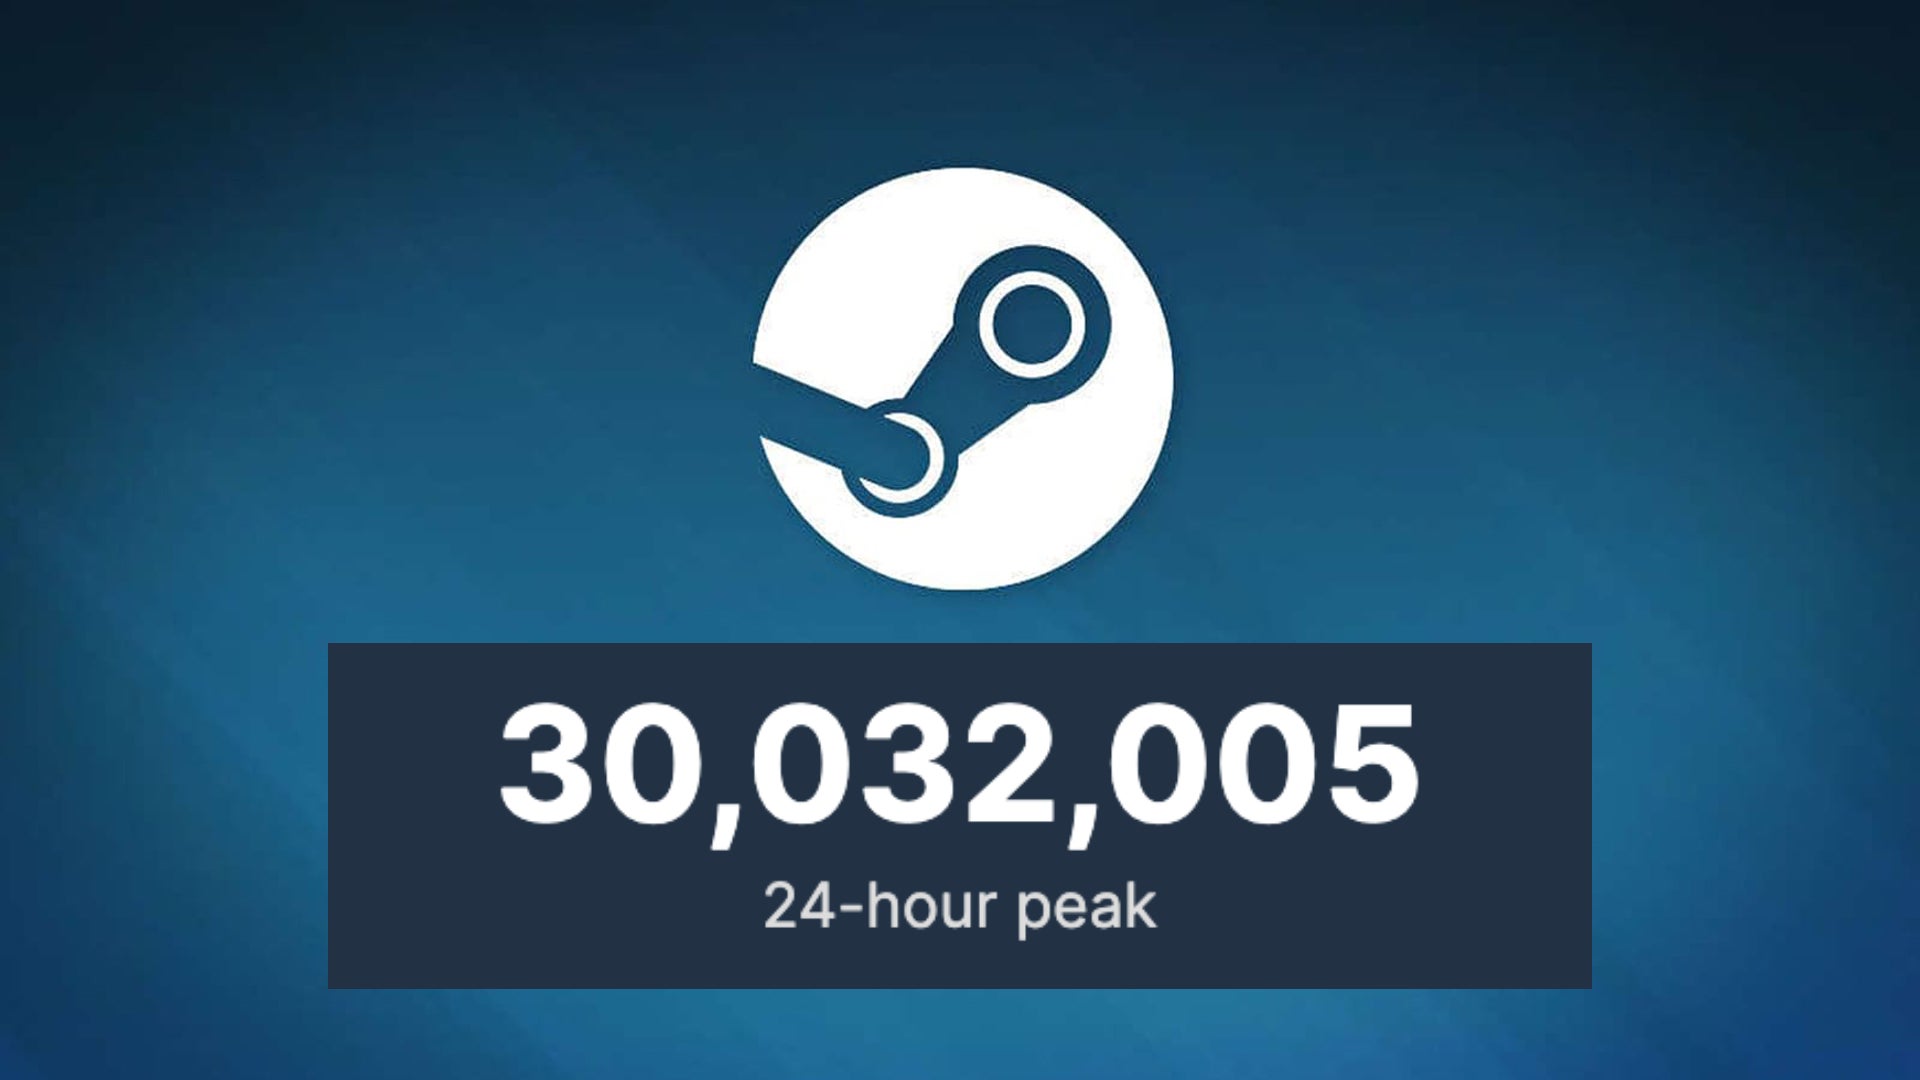 Image for Steam has broken the 30 million concurrent users mark